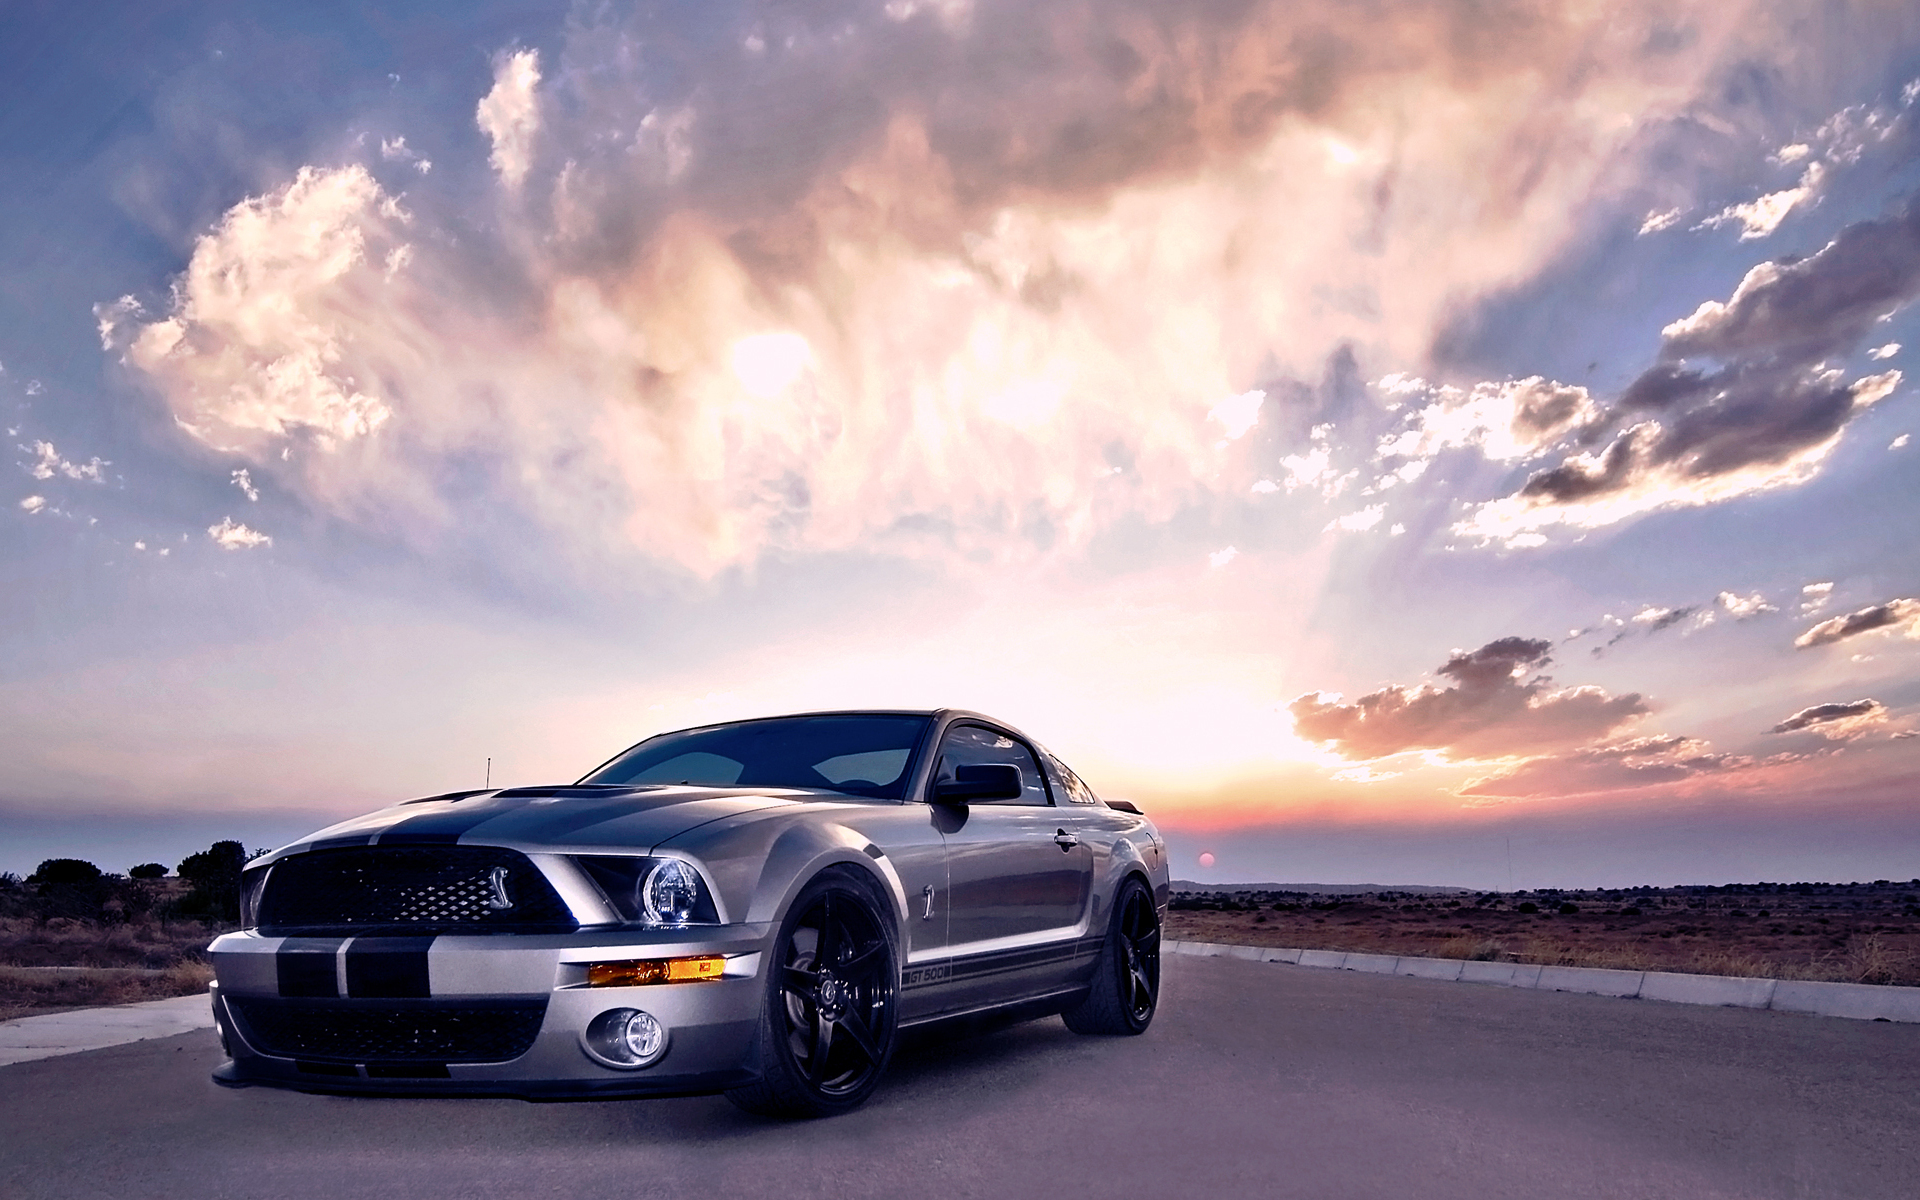 Shelby Cobra Wallpaper Android Phone Wallpaper